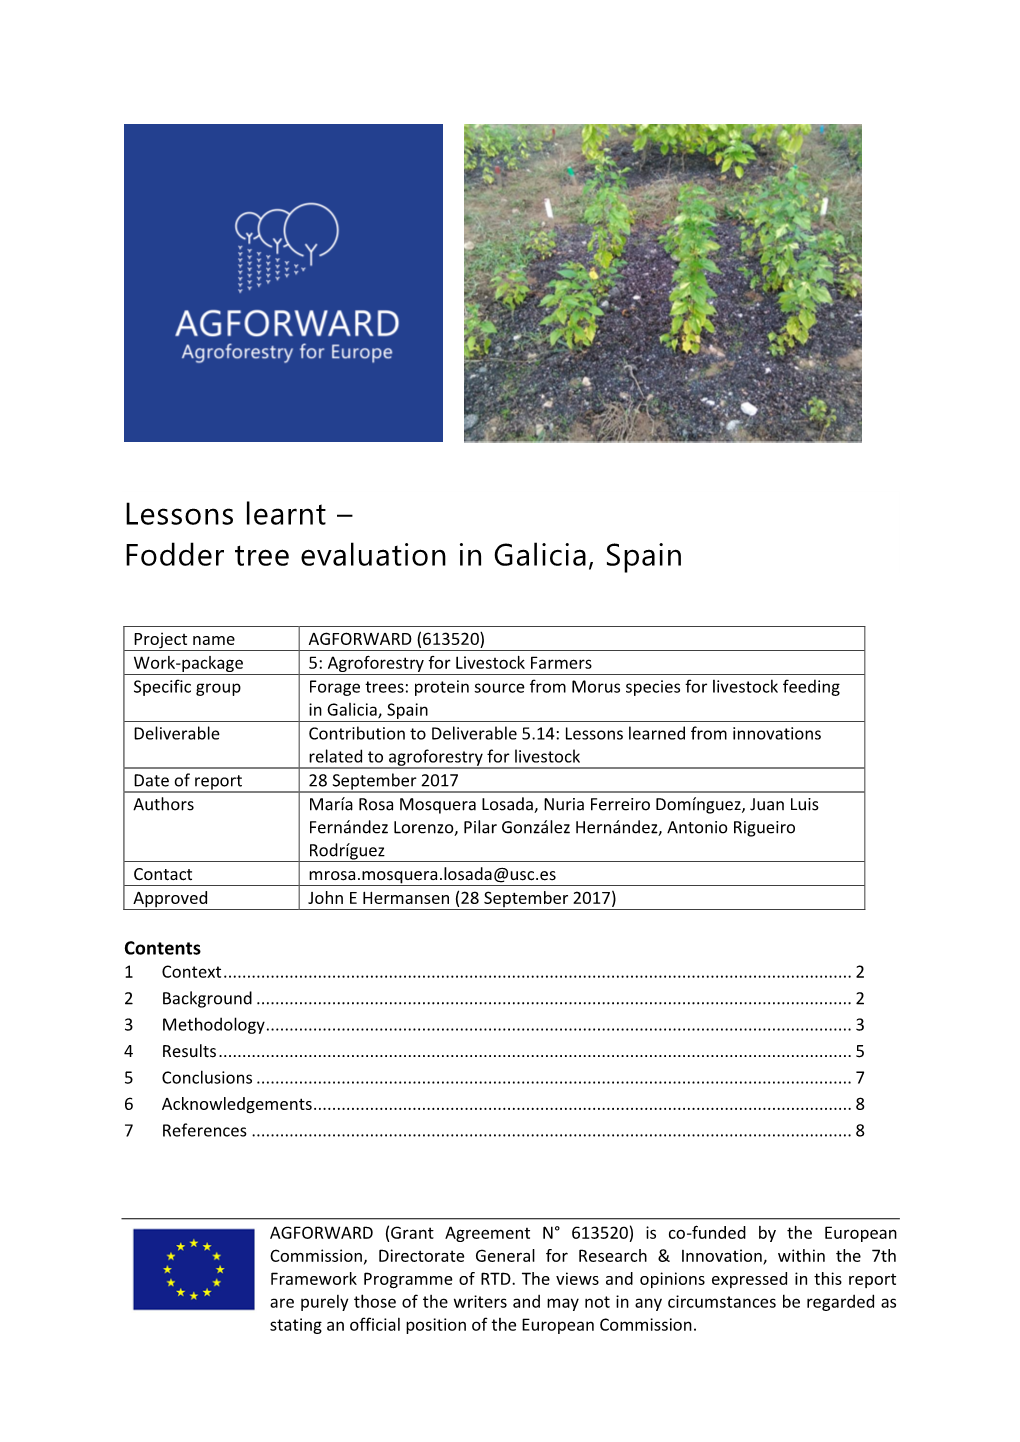 Lessons Learnt – Fodder Tree Evaluation in Galicia, Spain